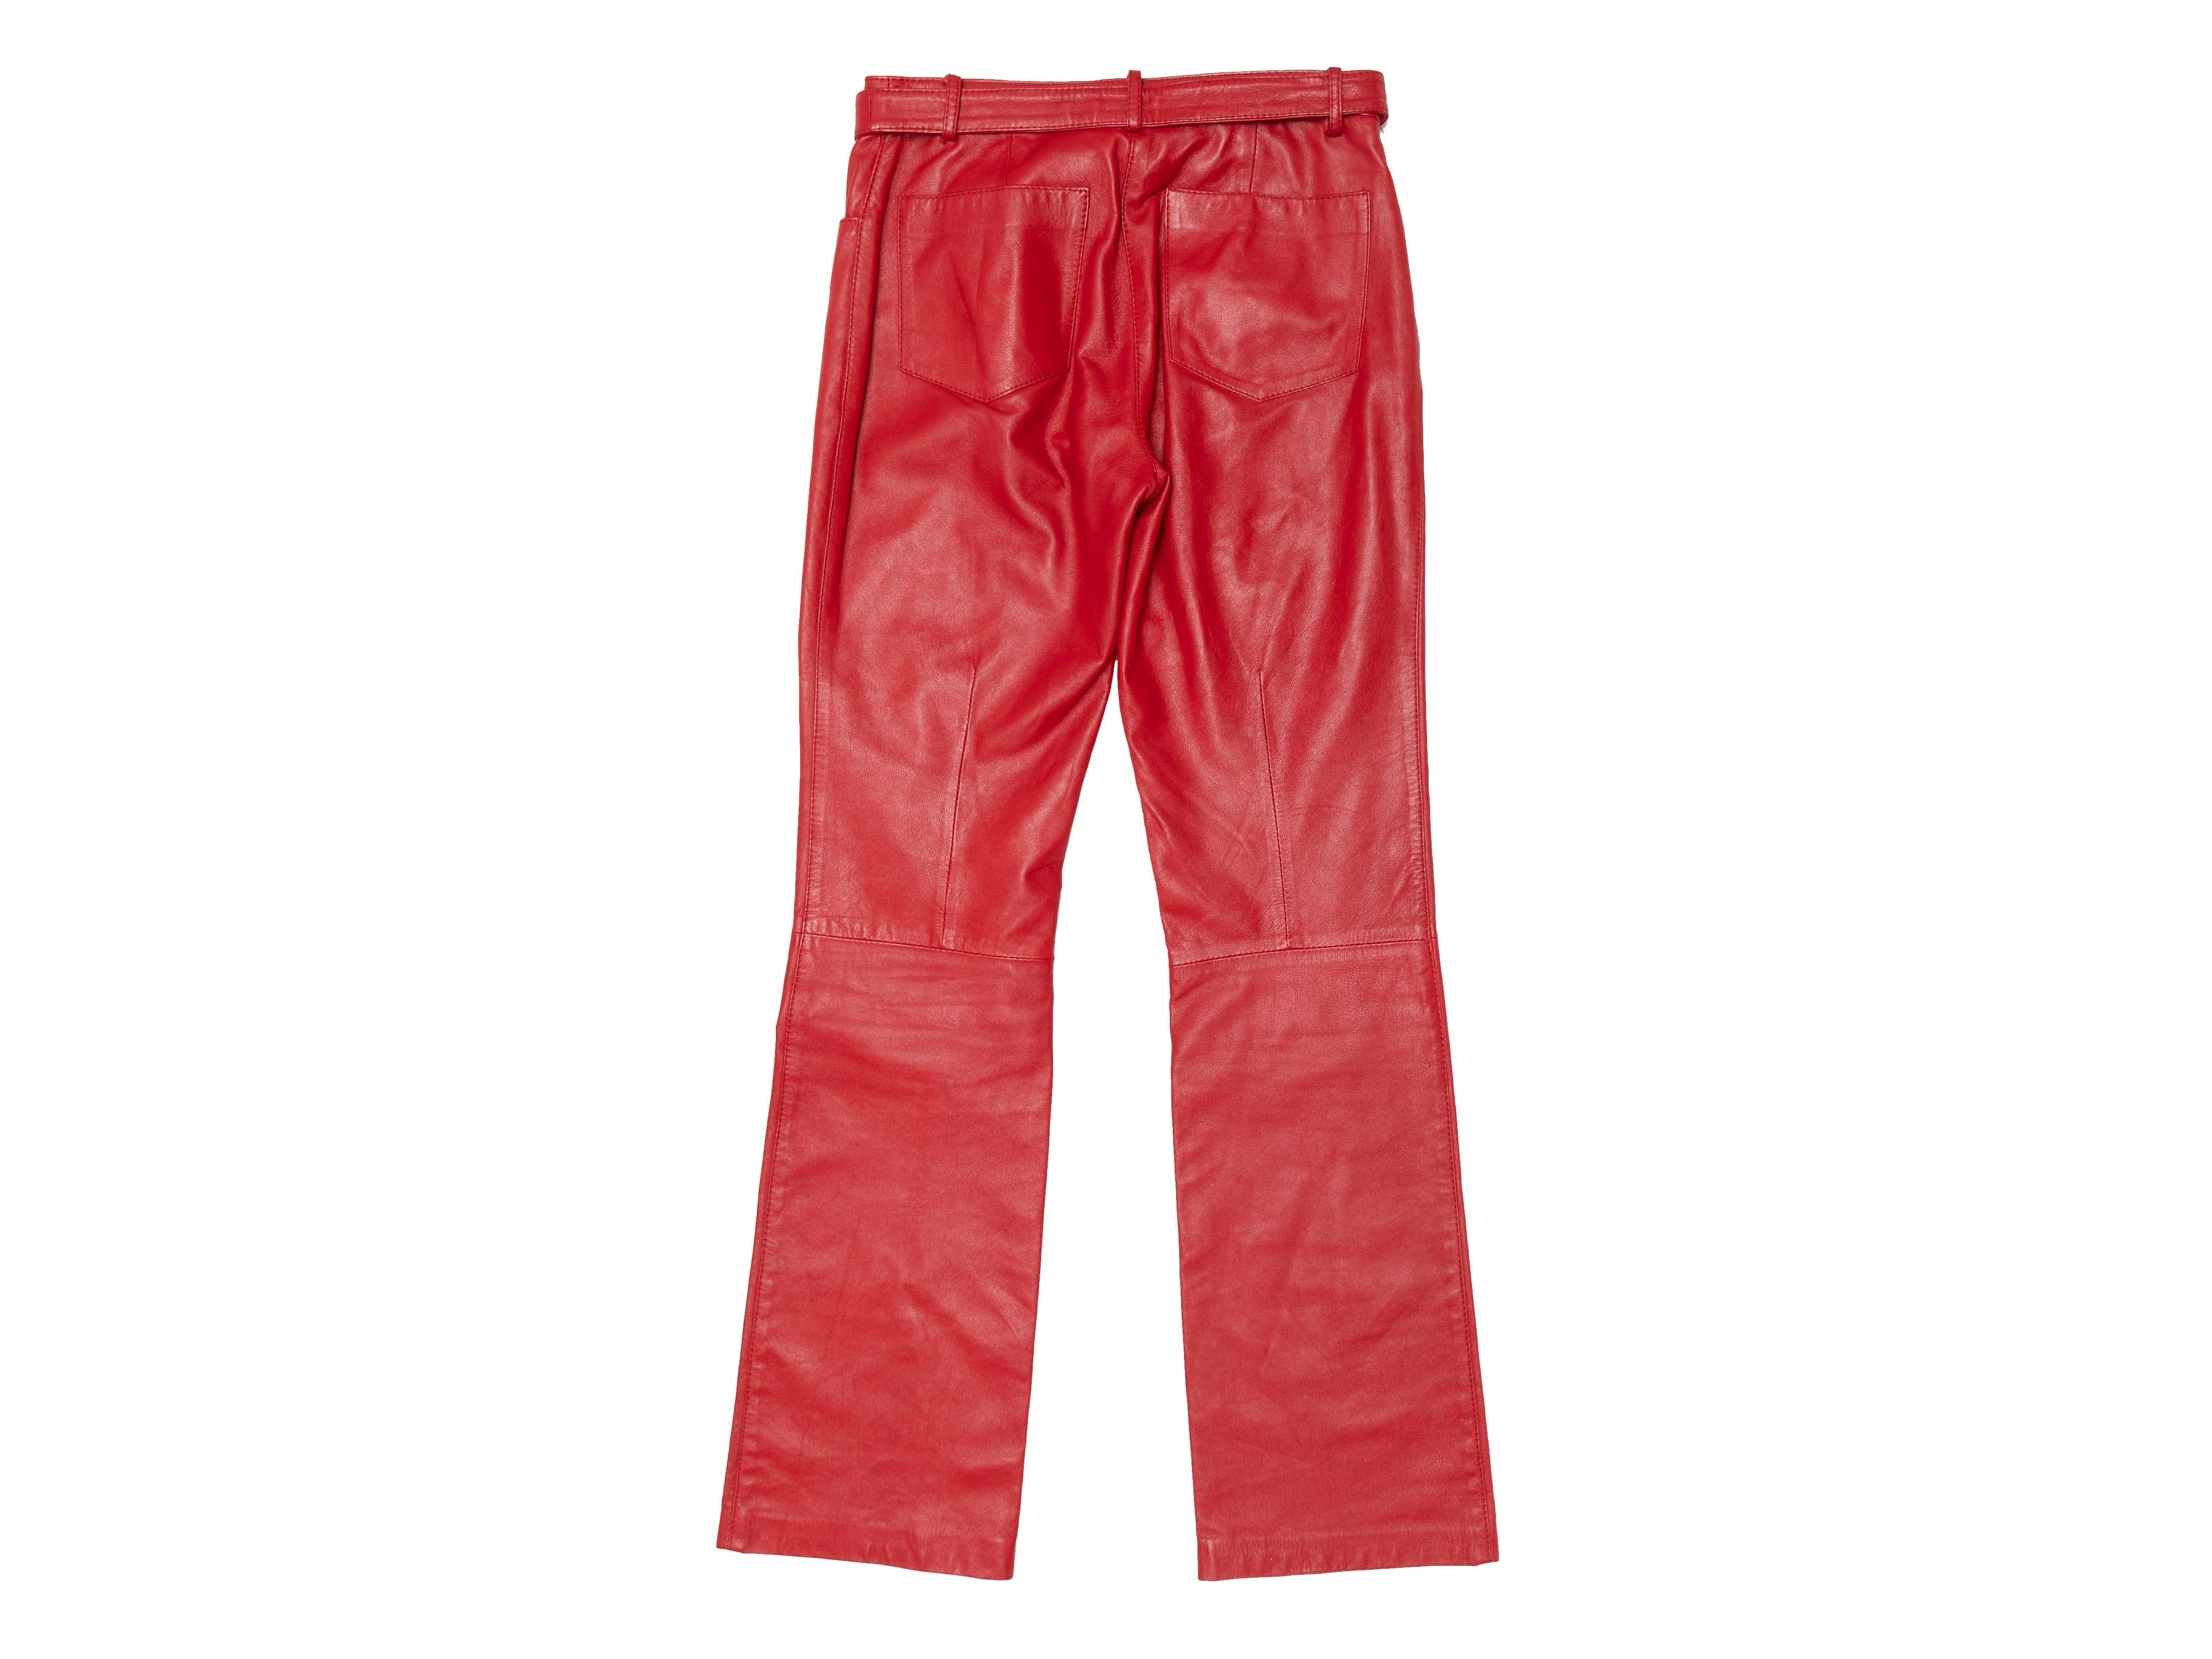 Vintage red leather pants by Dolce & Gabbana. Circa early 2000s. Five pockets. Front zip and snap closures at waist. 26